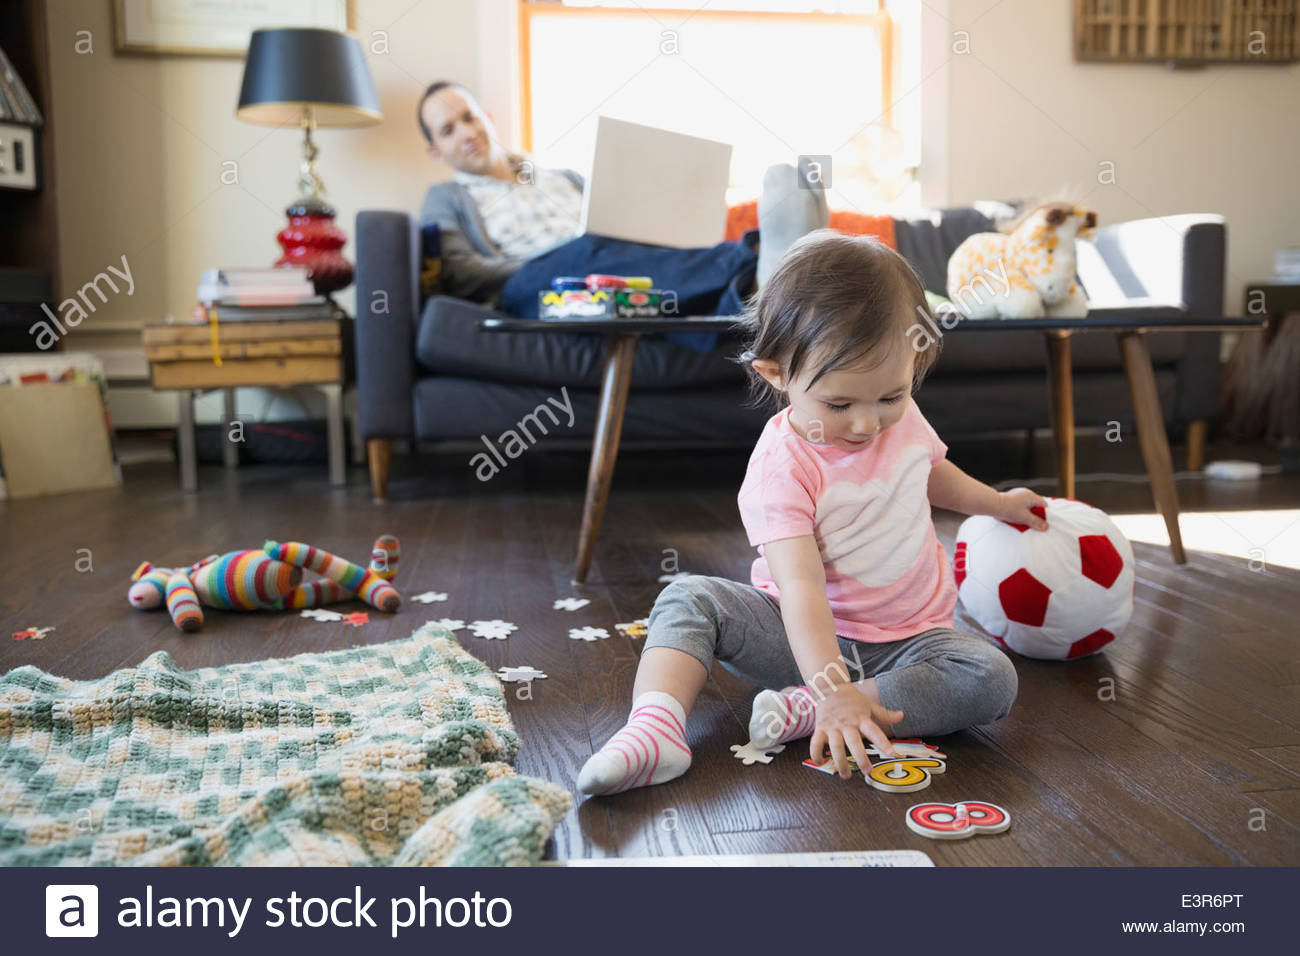 Father with laptop watching baby daughter play Stock Photo